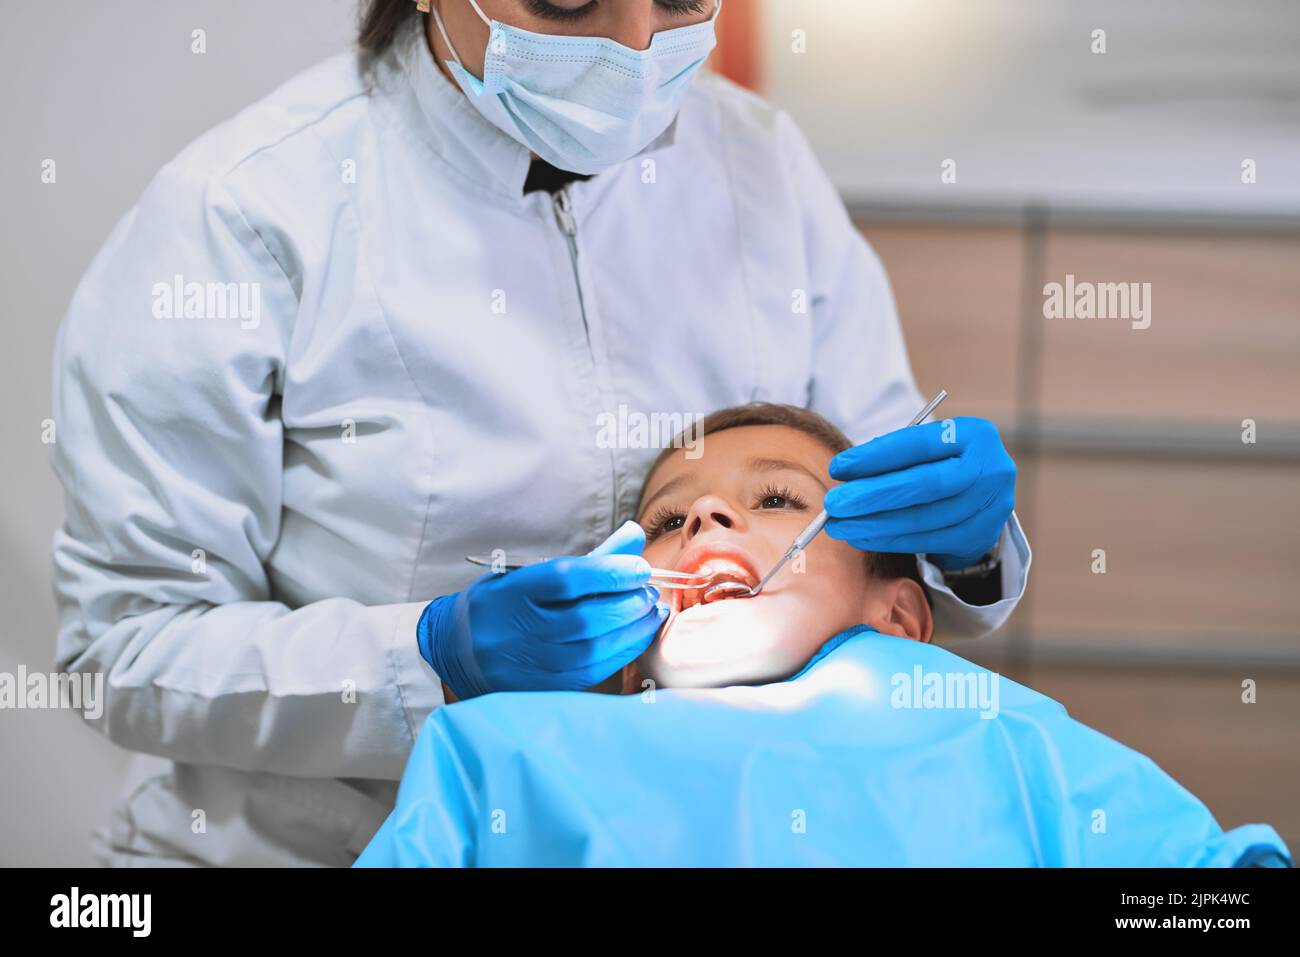 This is actually not too bad. a young little boy lying down on a dentist chair while getting a checkup from the dentist. Stock Photo